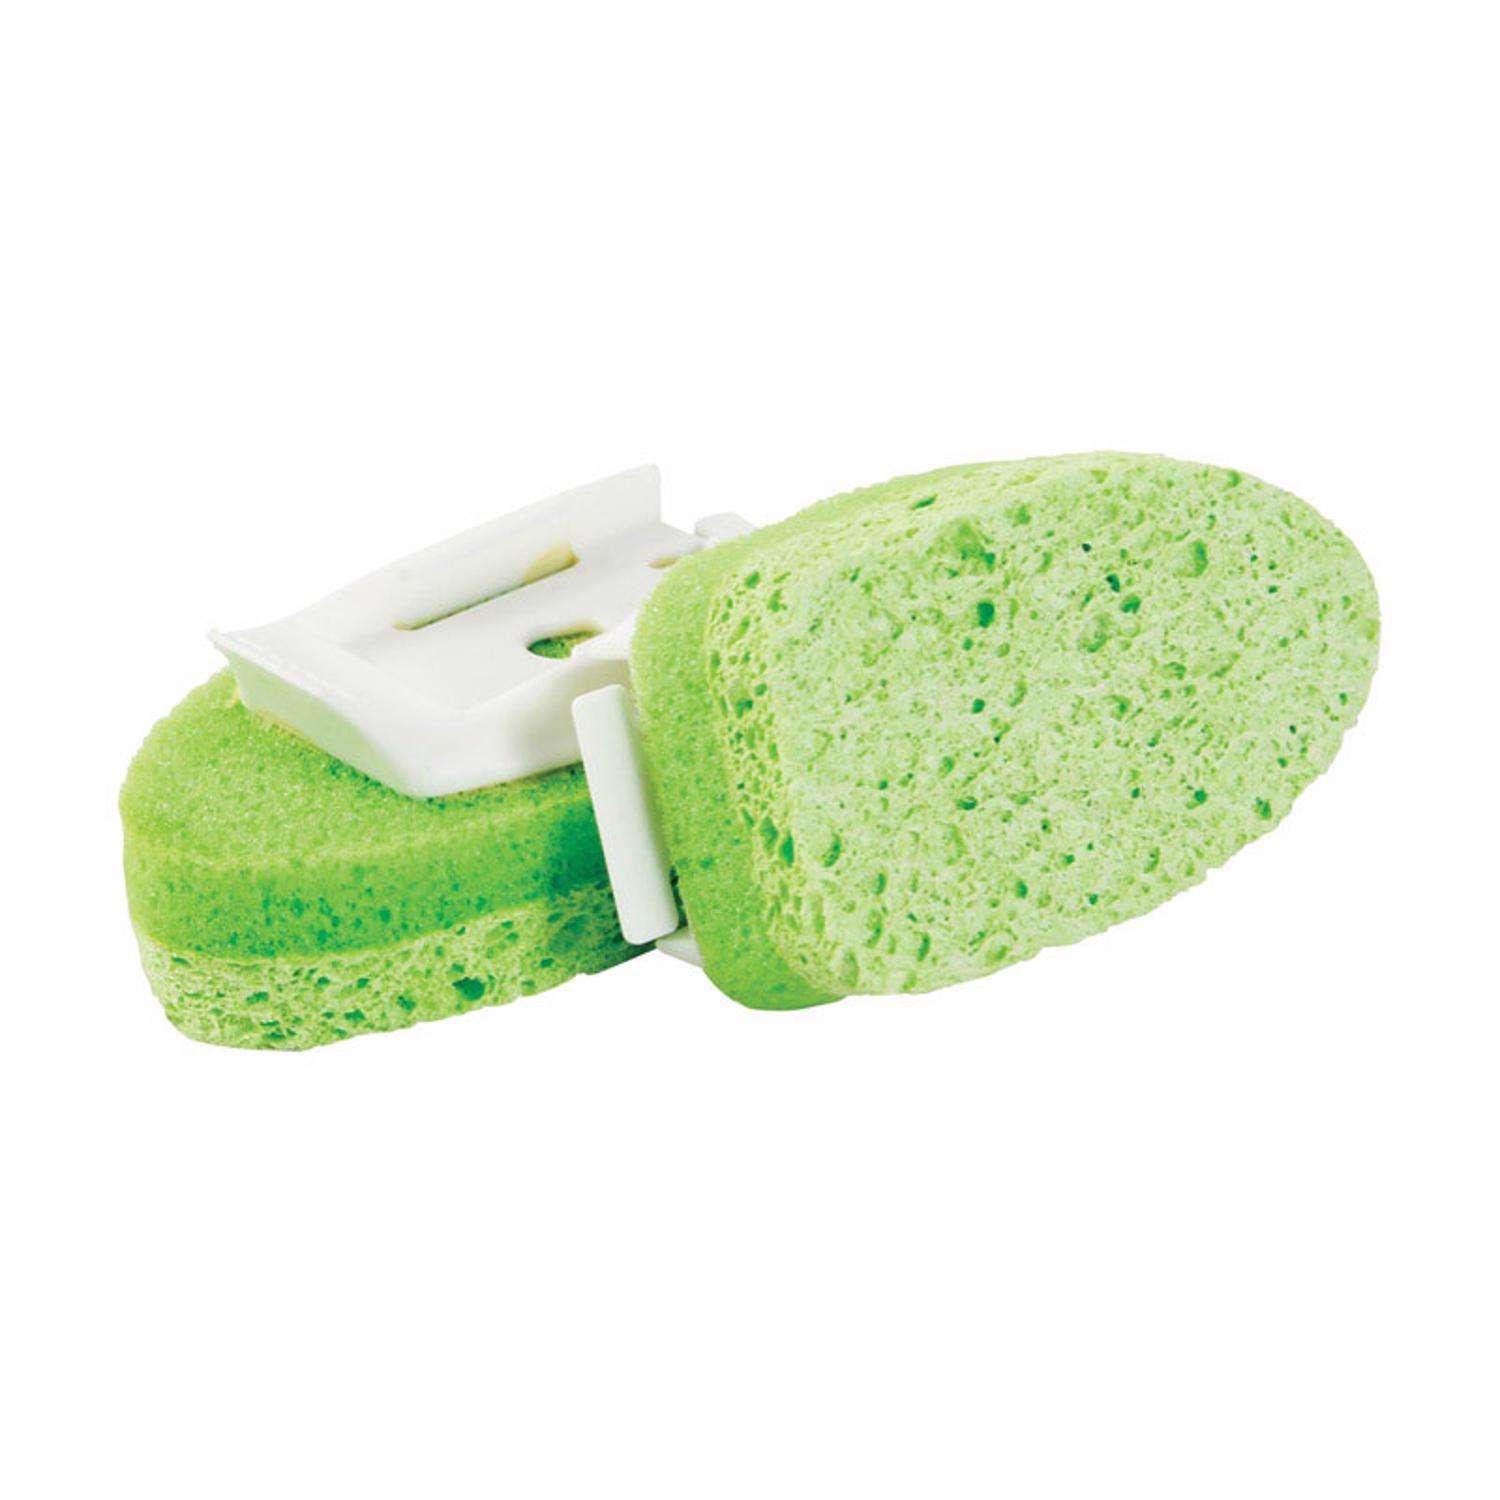 Arrow Dish Wand Sponge Refills, 6 Pack - Replacement Sponge Heads for Dish  Wand